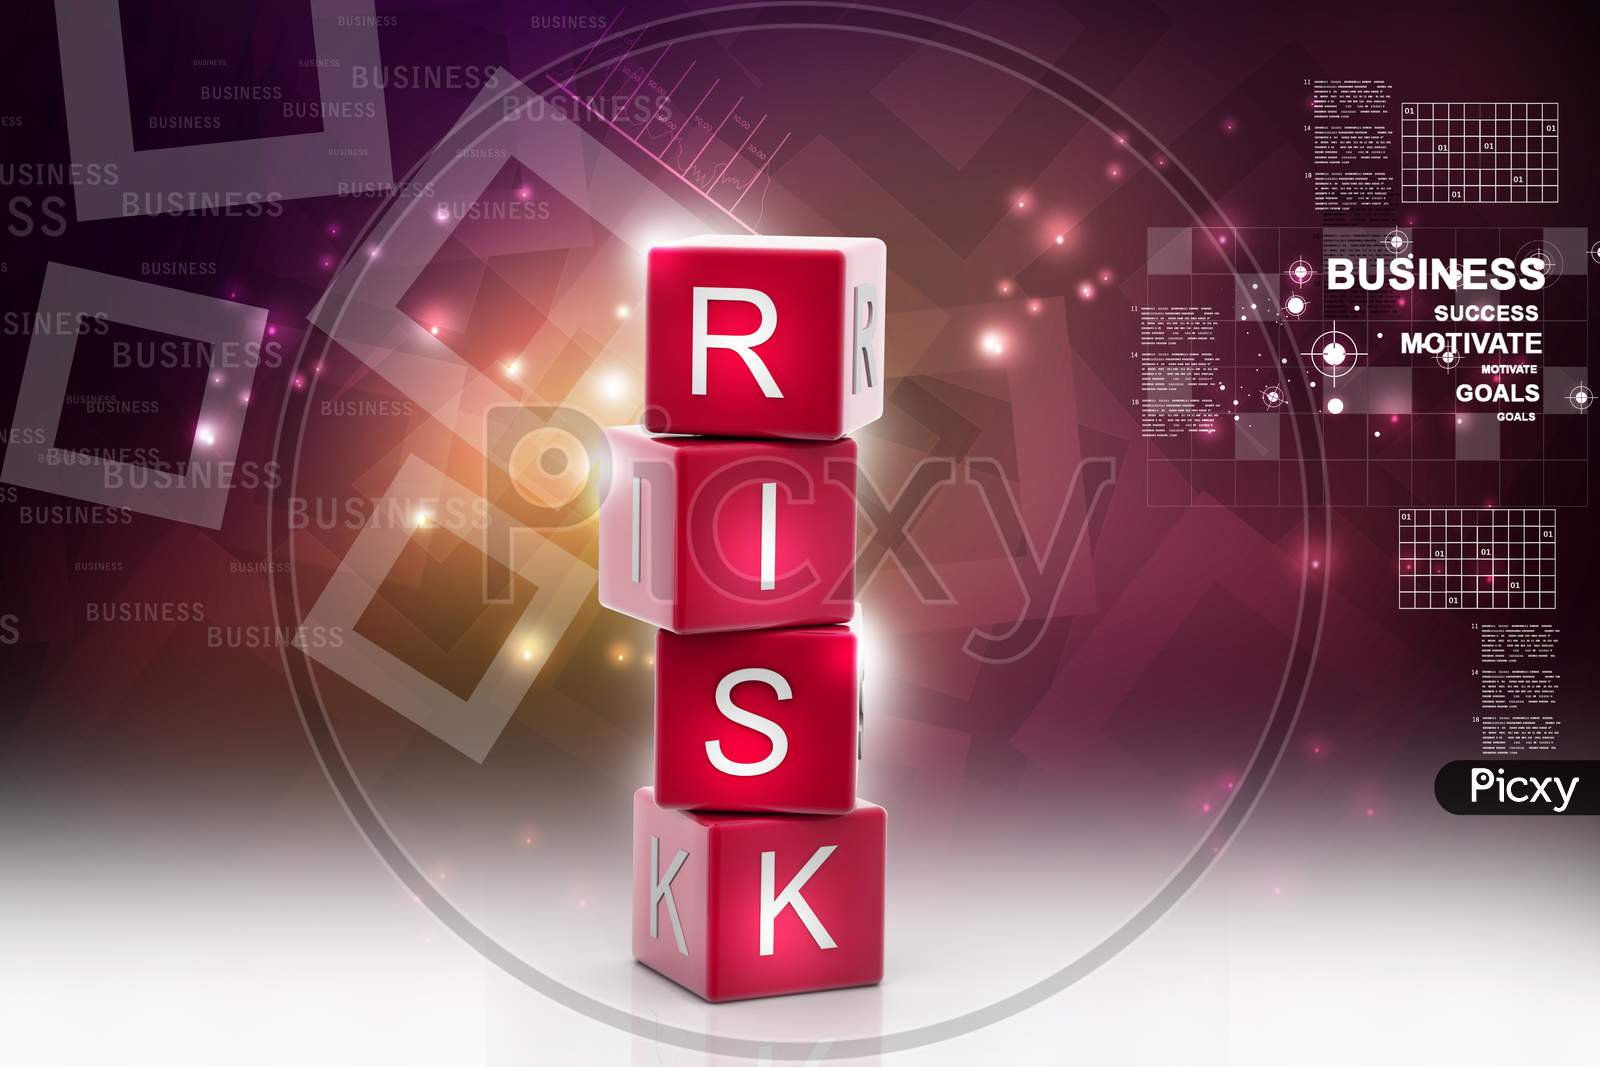 RISK Texted Blocks on Coloured Background